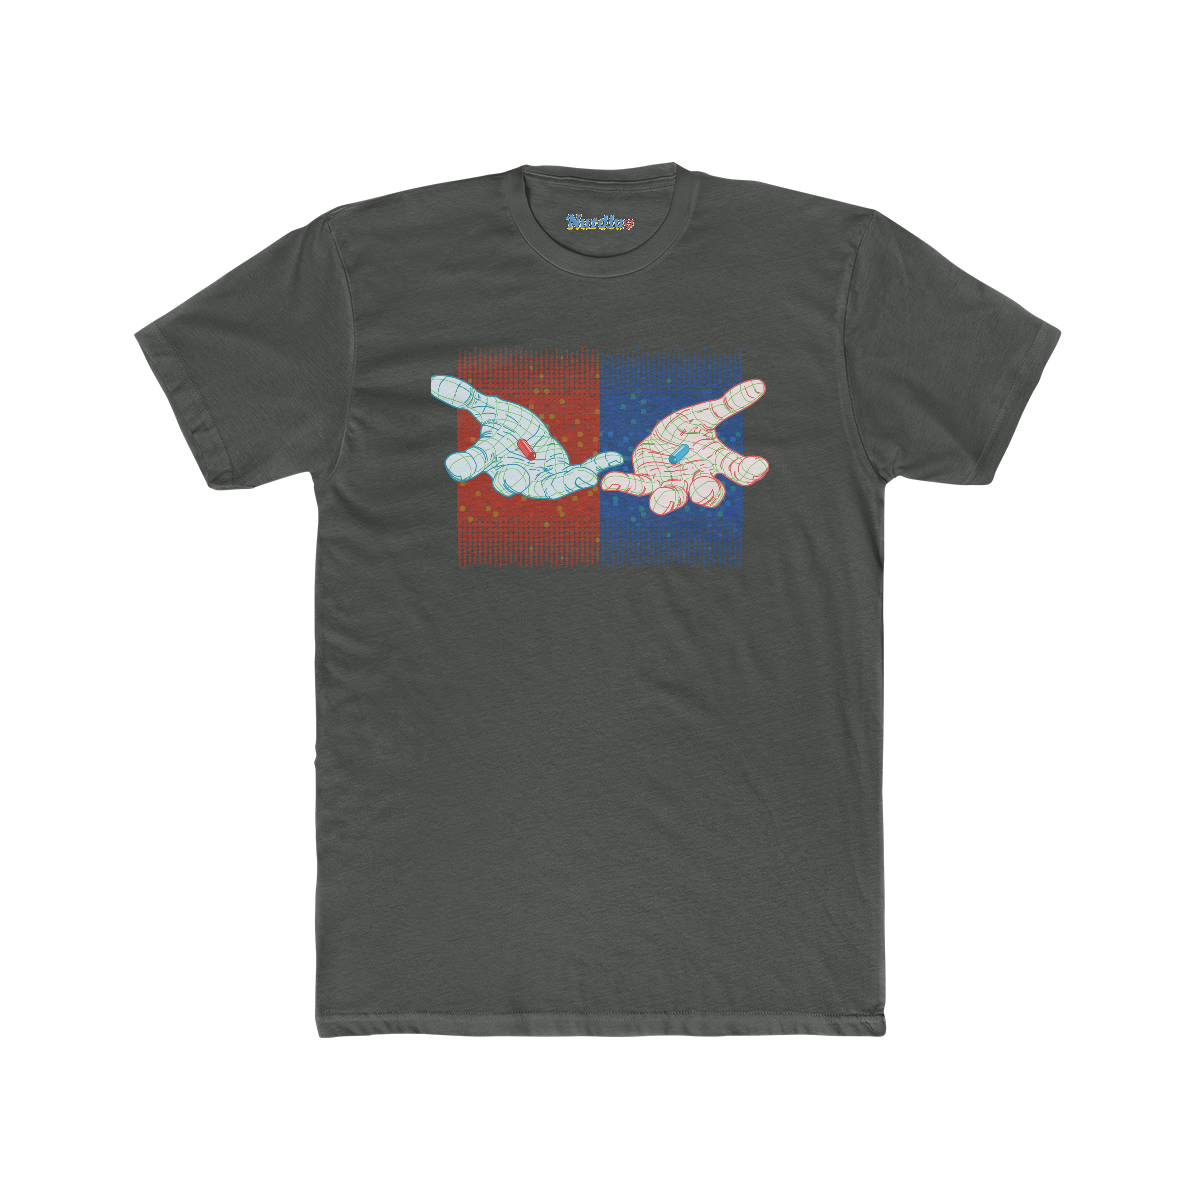 Two Hands (red & blue) - Men's Cotton Crew Tee